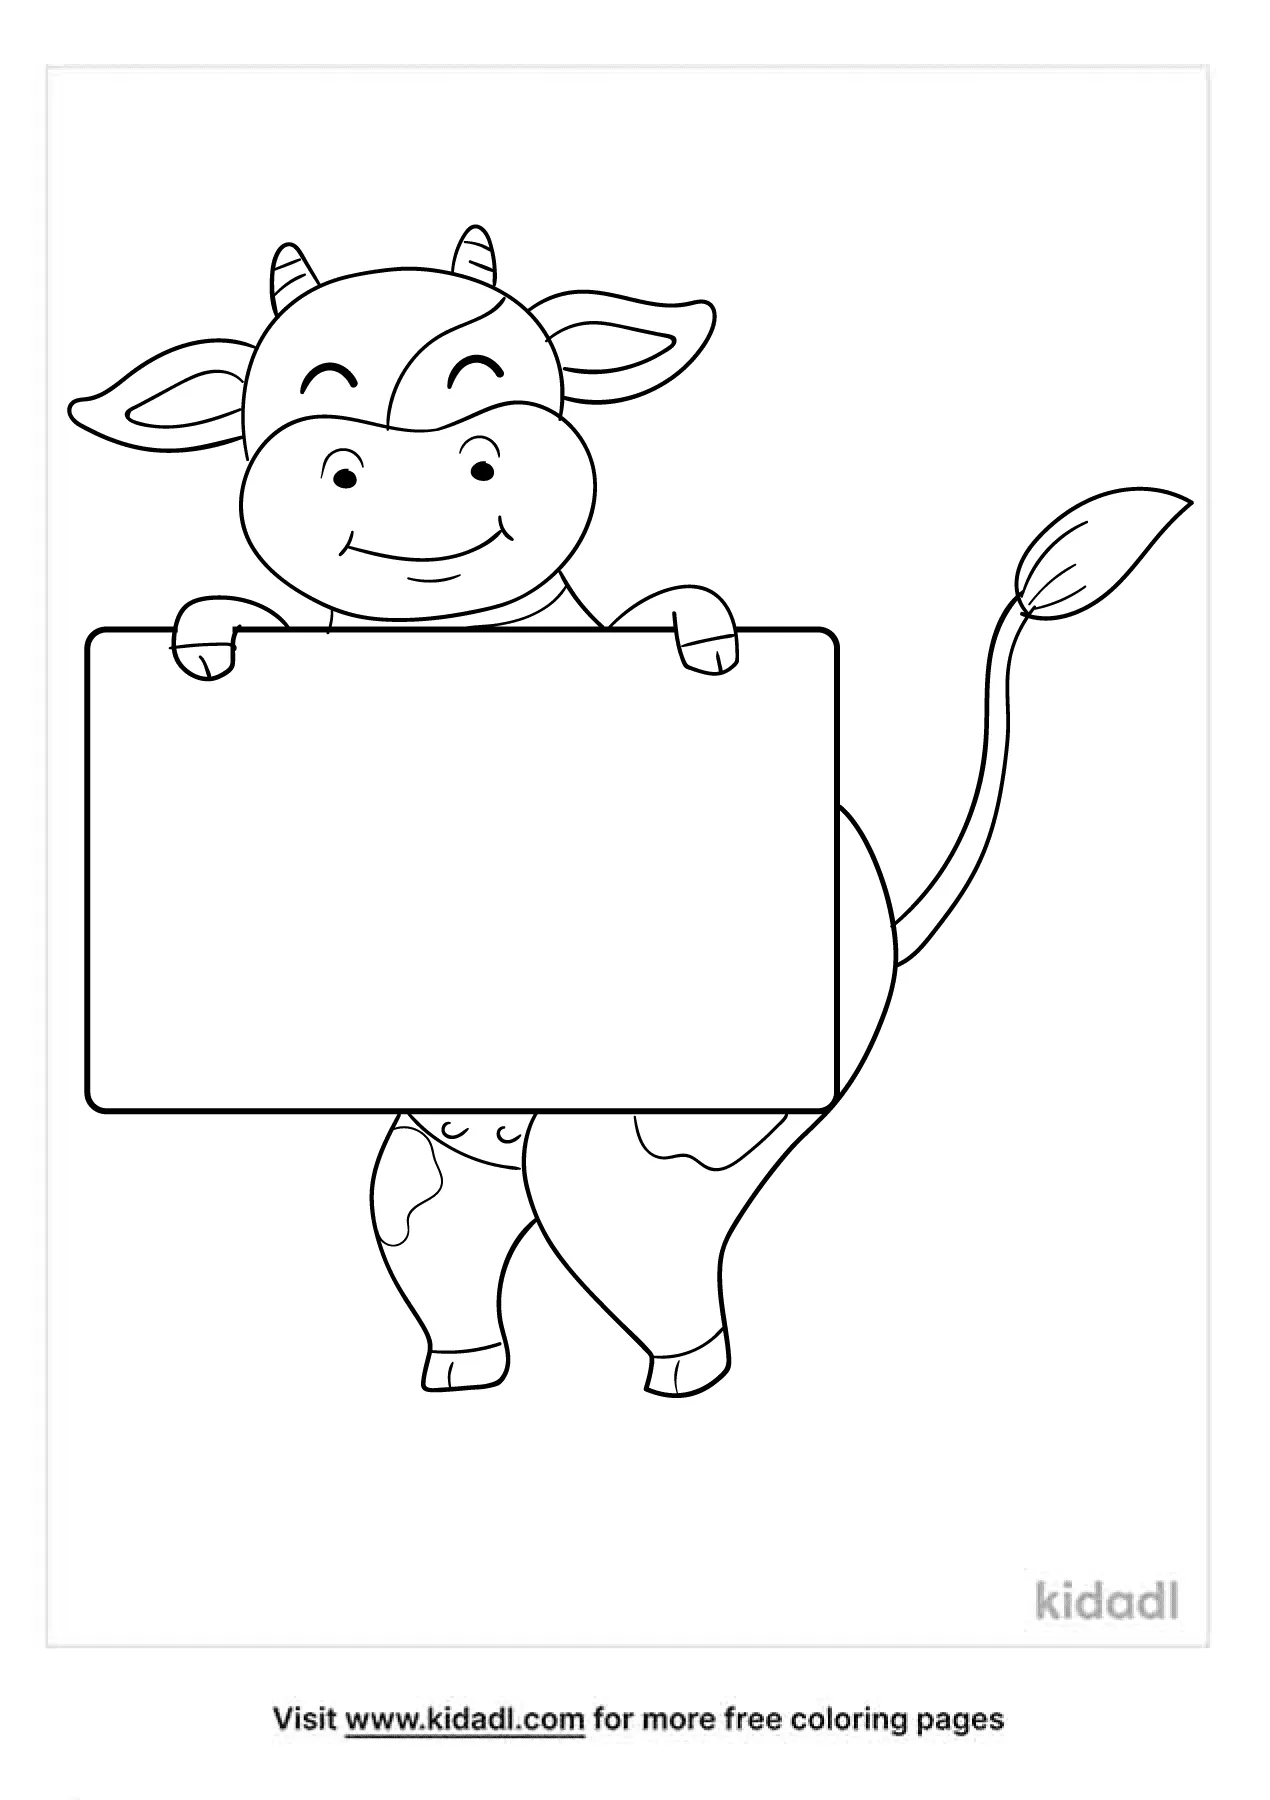 Cow Holding Sign Coloring Page